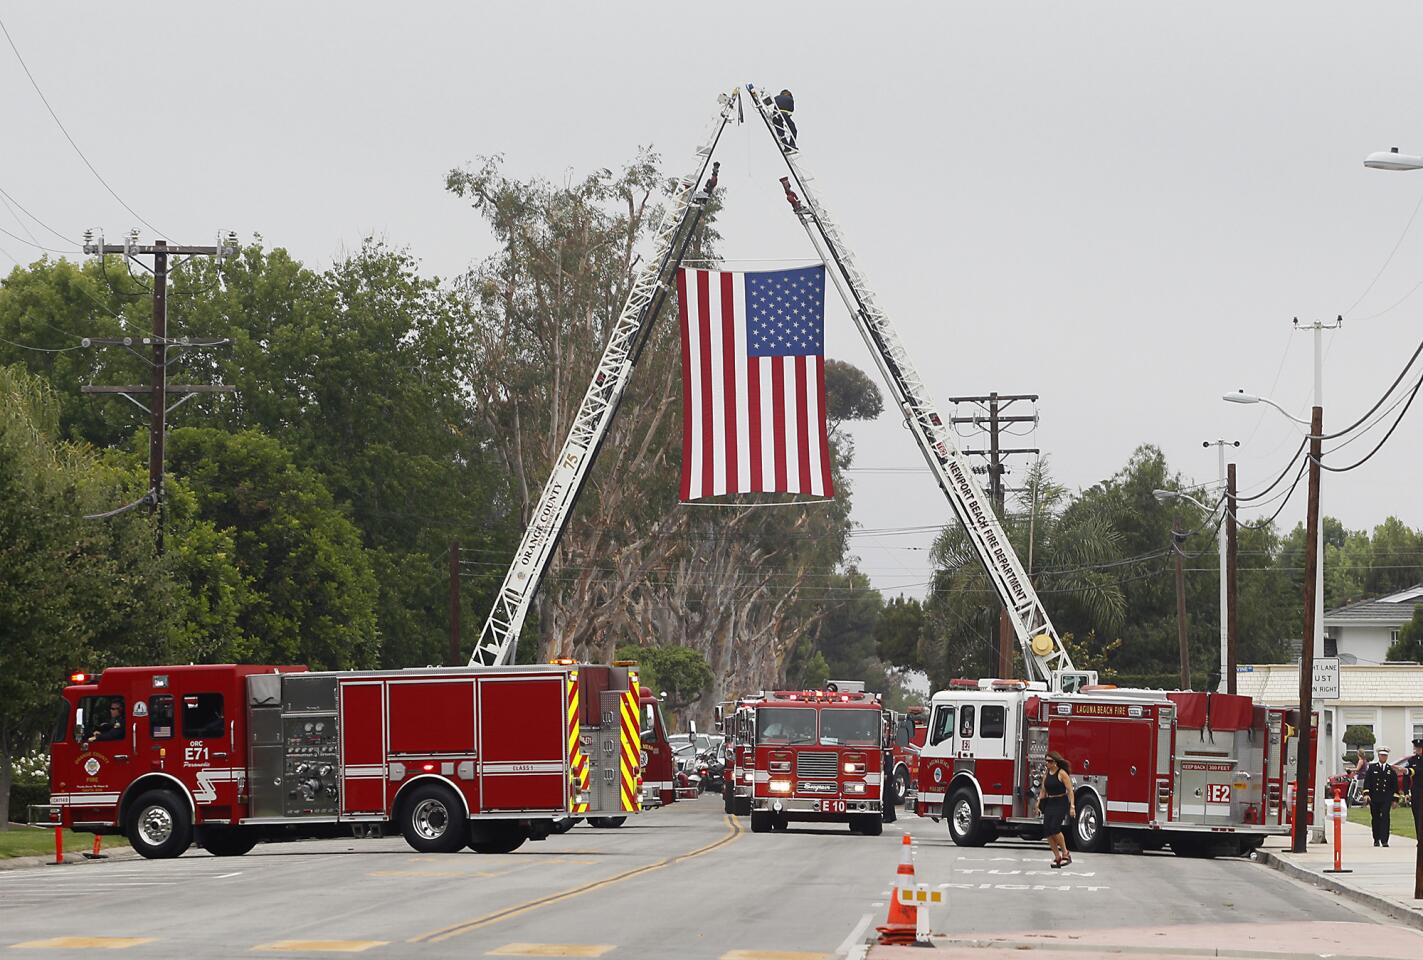 Honoring Firefighters